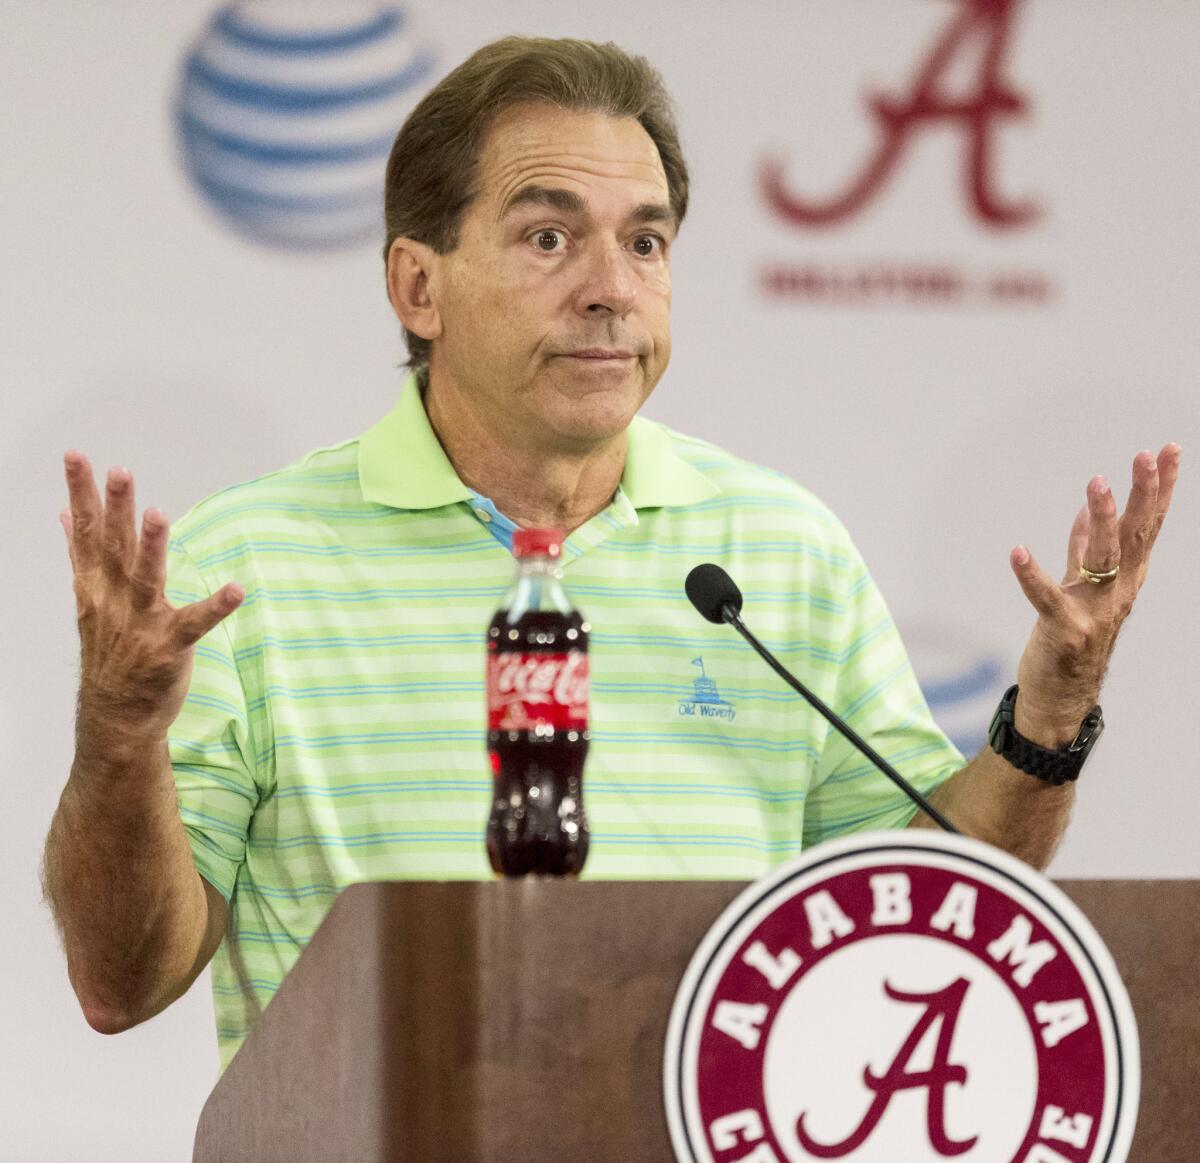 Coach Nick Saban will try to avoid falling to 3-2 for the first time since his first year at Alabama when the Crimson Tide travel to play at Georgia.